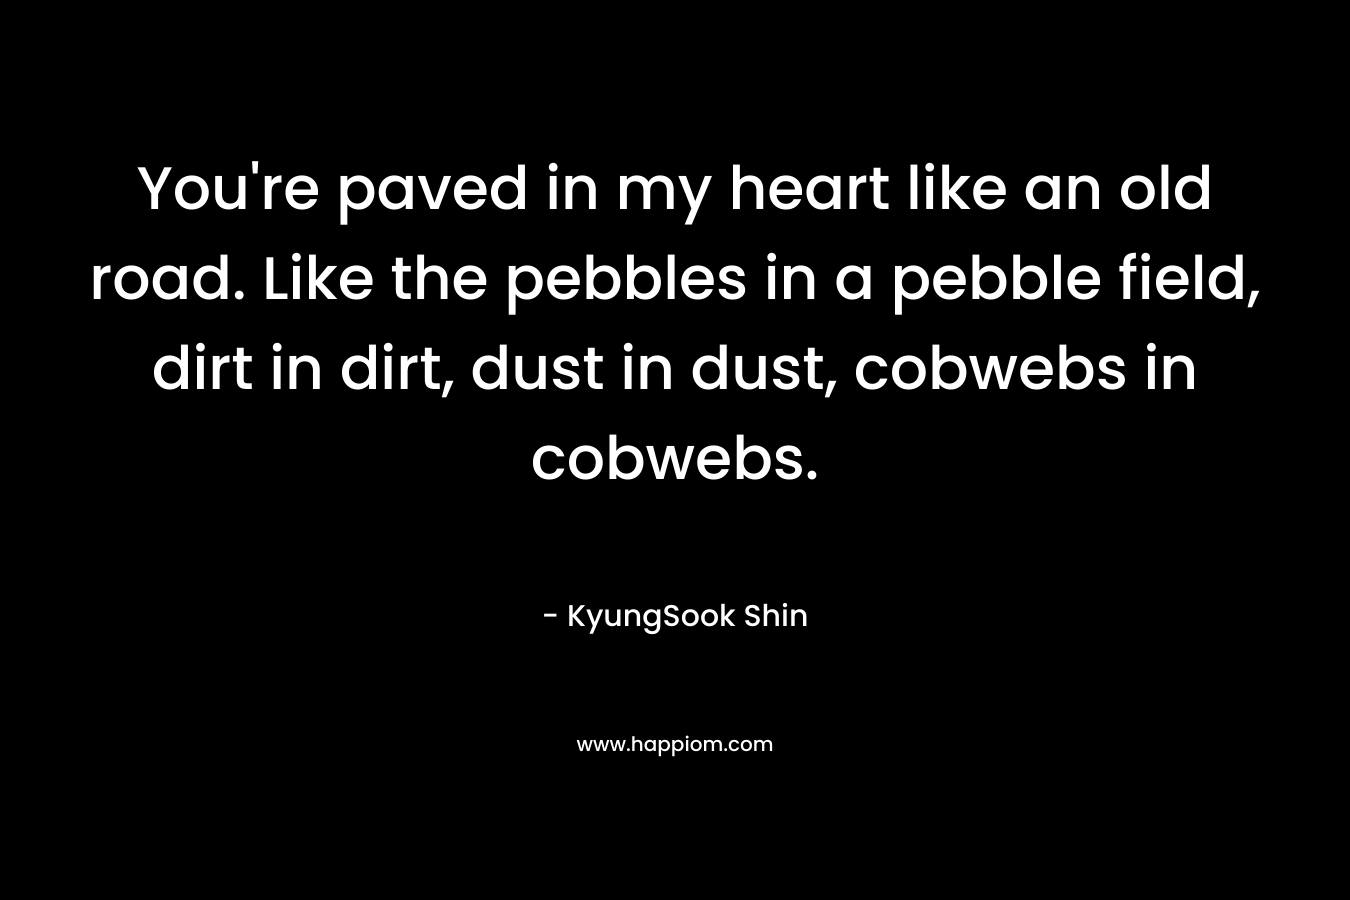 You’re paved in my heart like an old road. Like the pebbles in a pebble field, dirt in dirt, dust in dust, cobwebs in cobwebs. – KyungSook Shin